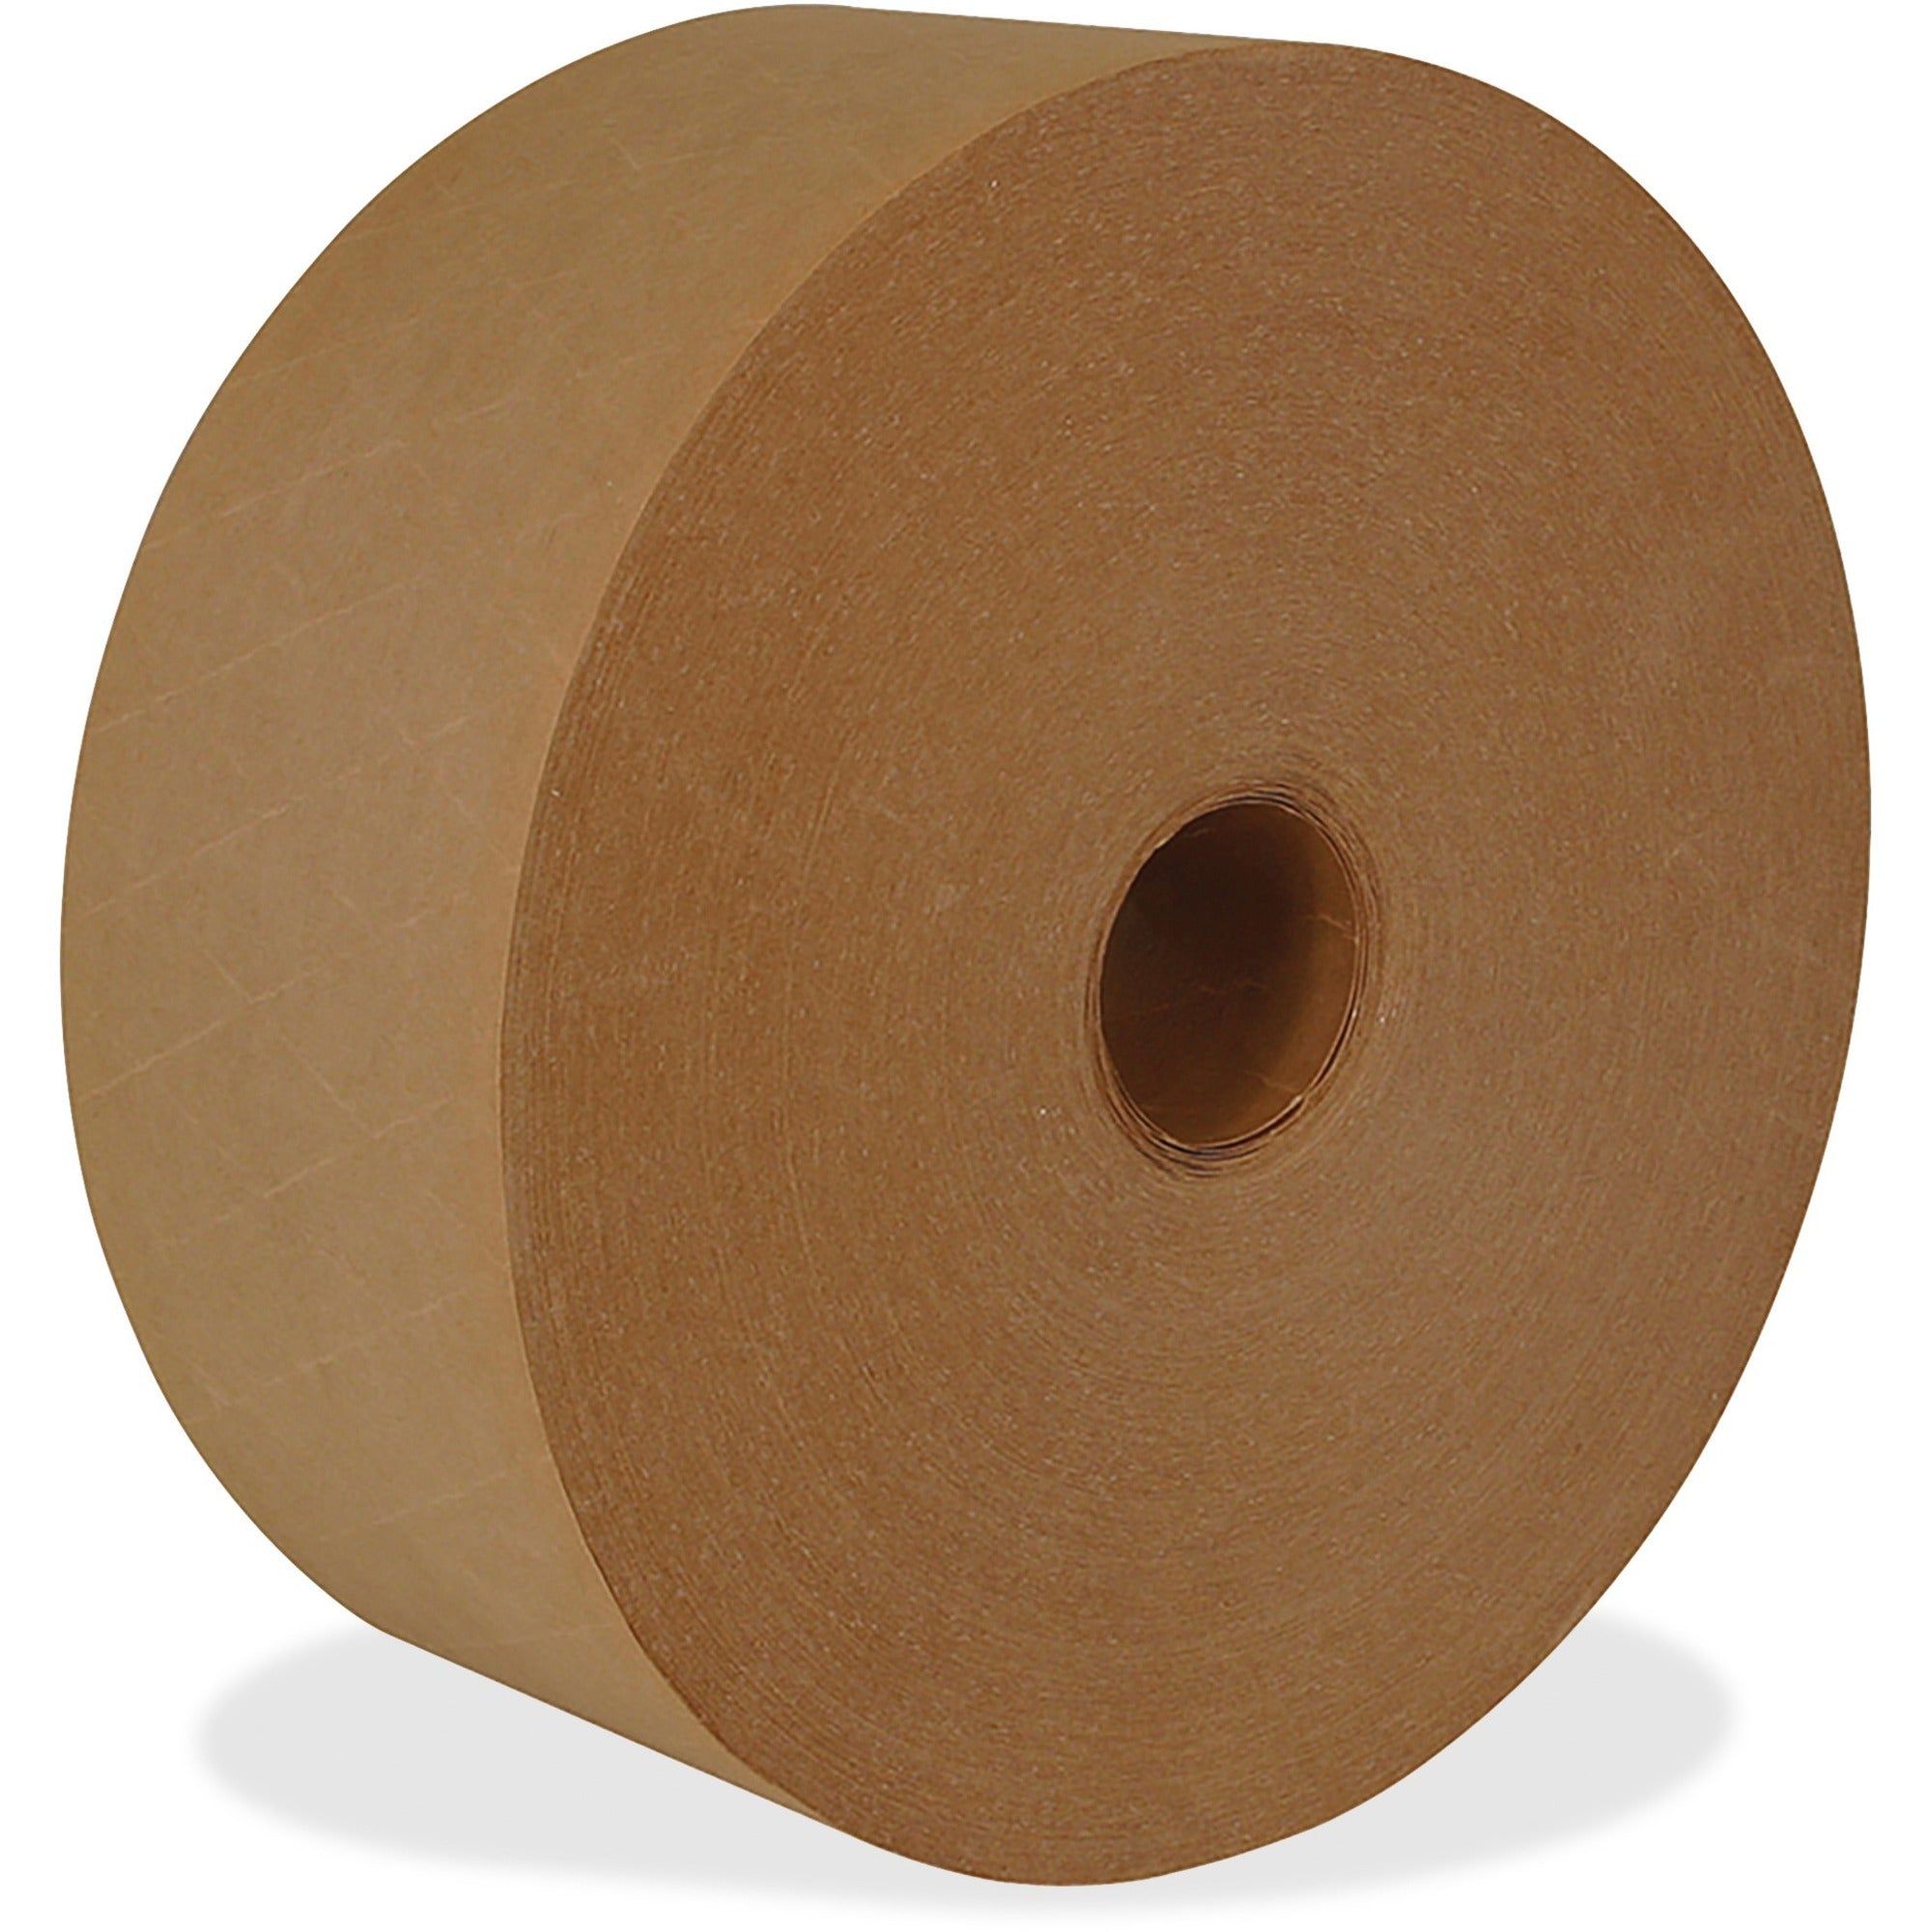 ipg Medium Duty Water-activated Tape - 200 yd Length x 3" Width - Weather Resistant - For Sealing, Packing - 10 / Carton - Natural - 